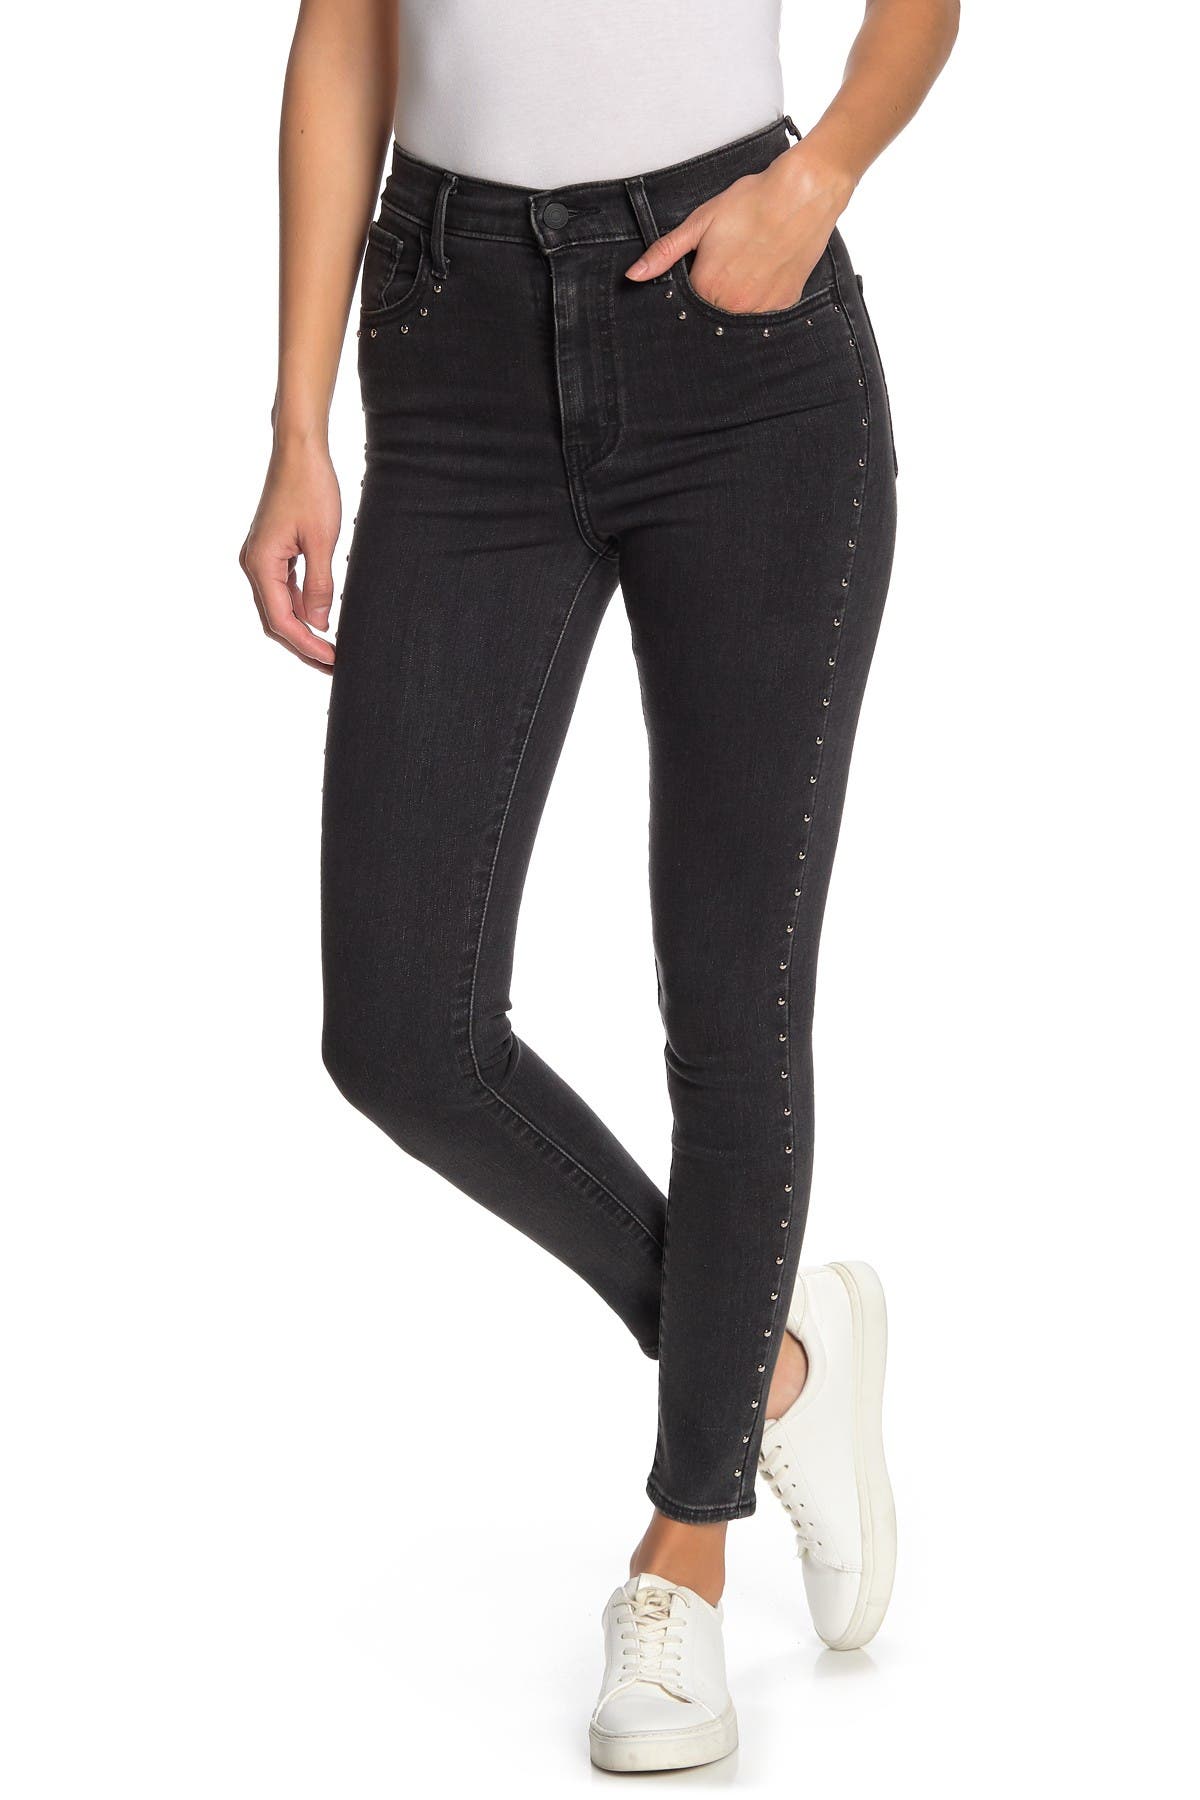 levi's mile high ankle skinny jeans